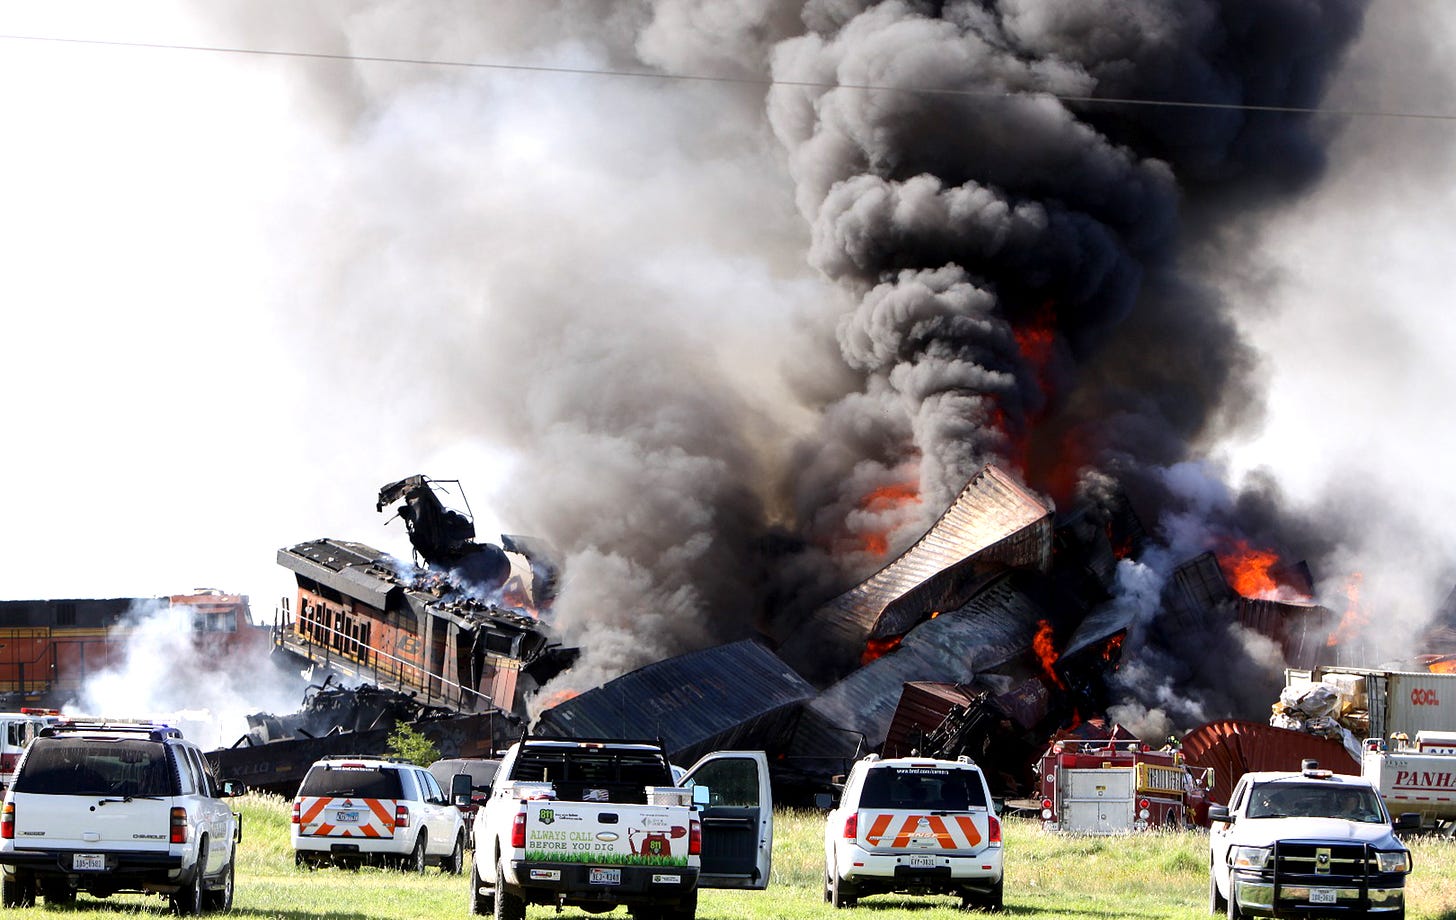 3 Missing, 1 Injured After Two Trains Collide Head-On in Fiery Texas Crash